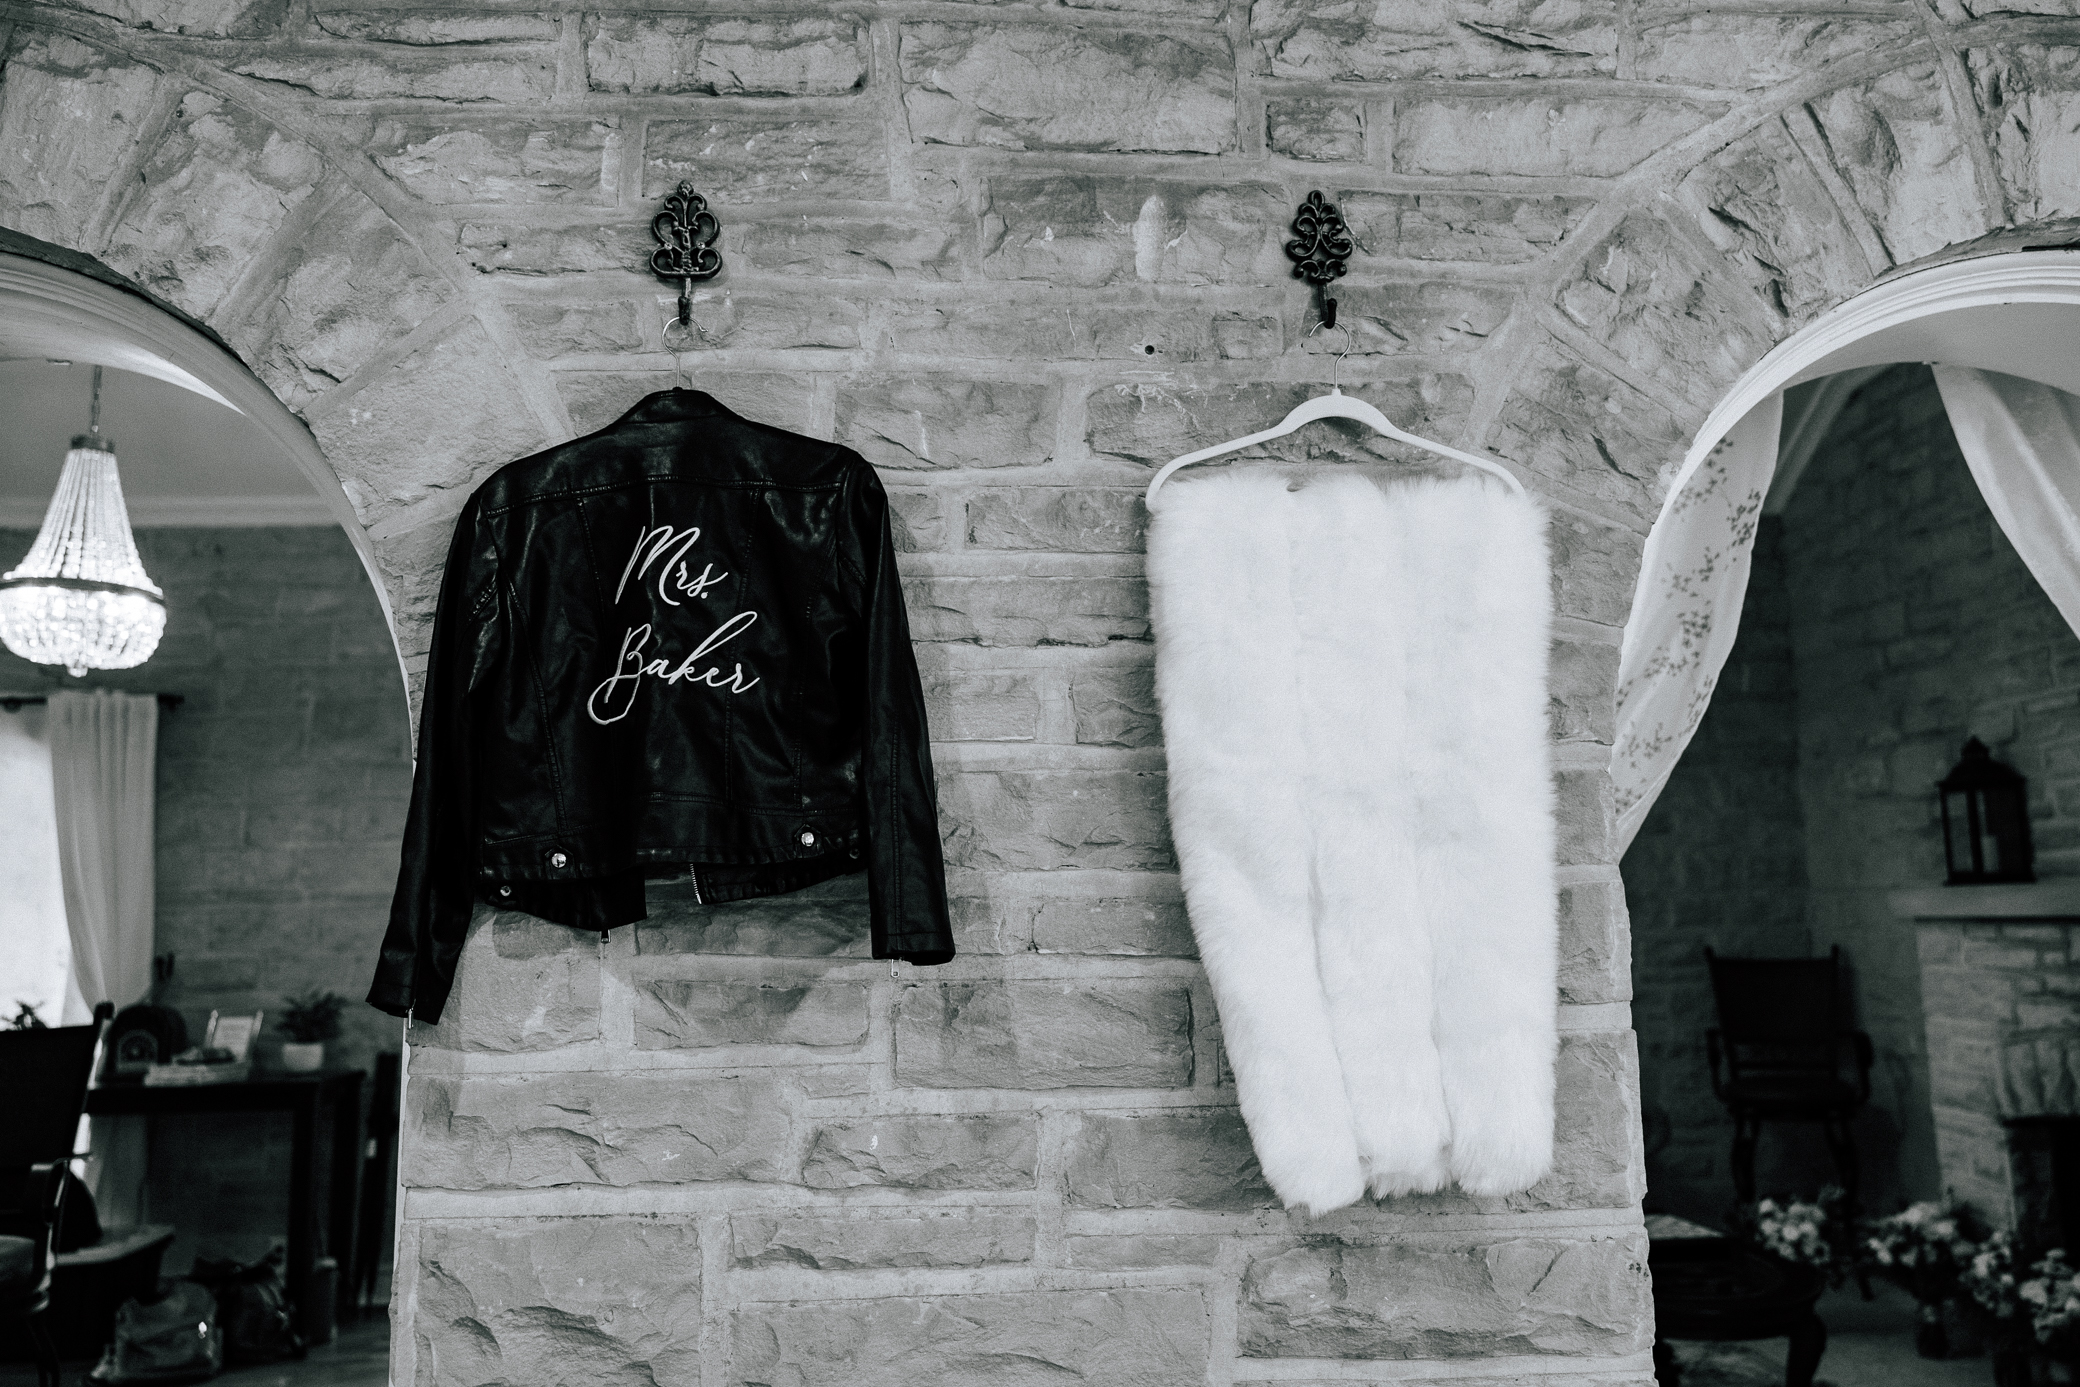 A black and white photo features two important aspects of the bride's attire which can be seen hanging from the stone walls inside of the bridal suite at Knotting Hills in Pevely, Missouri--a white fur shawl to keep warm on a cold day, and a black leather jacket with the words "Mrs. Baker" embroidered on the back in white thread.